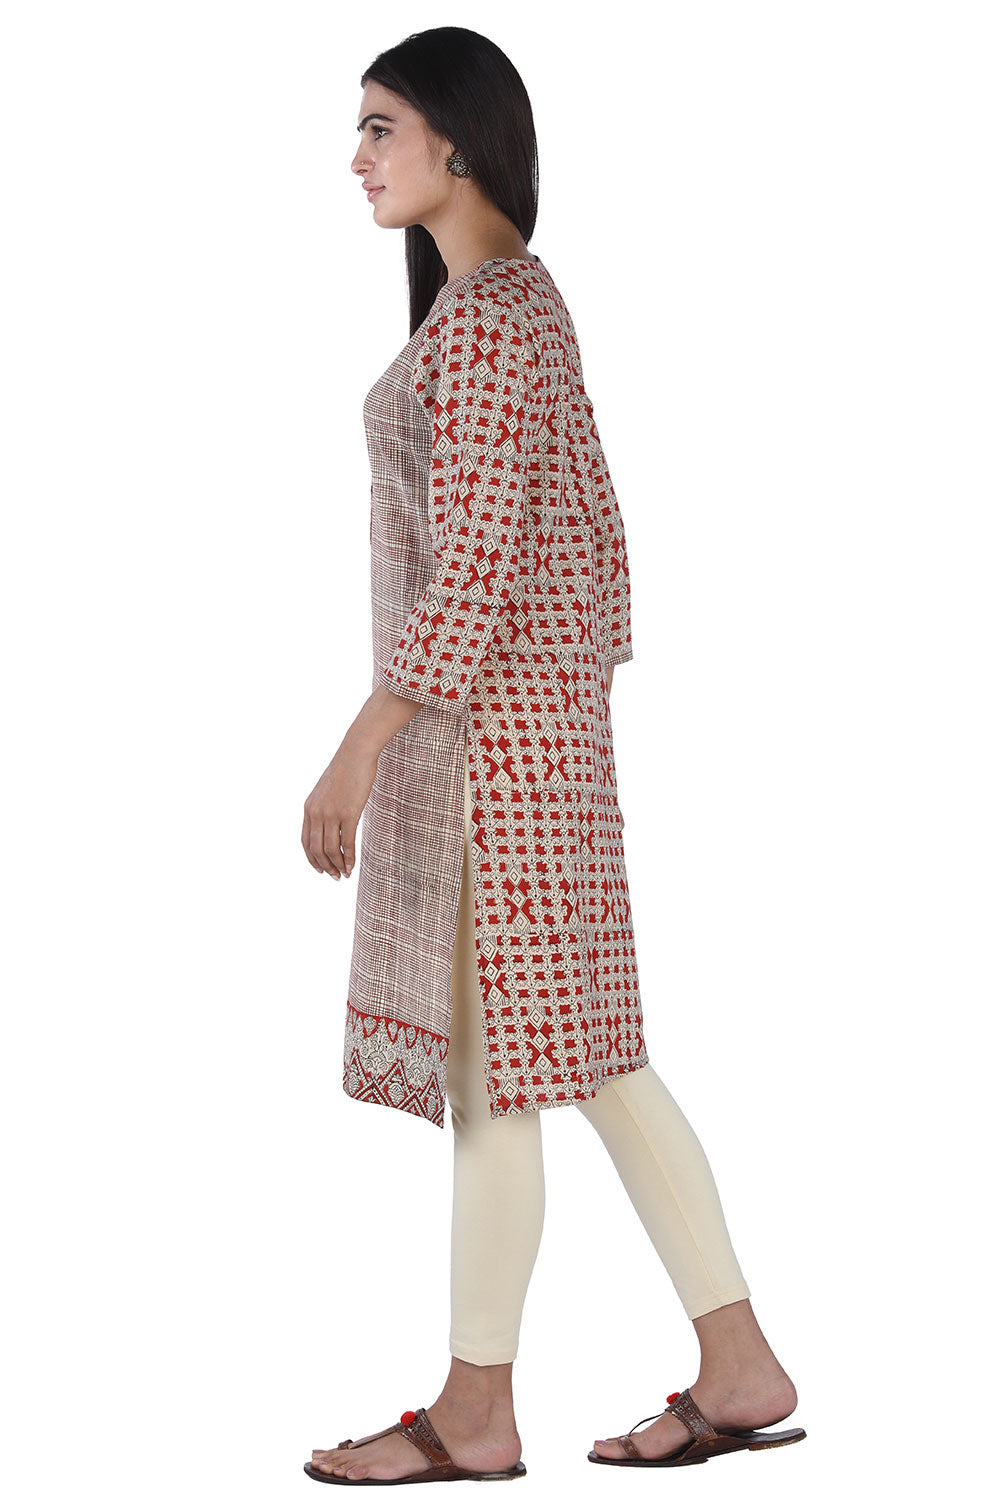 Beige and red hand block printed cotton kurti